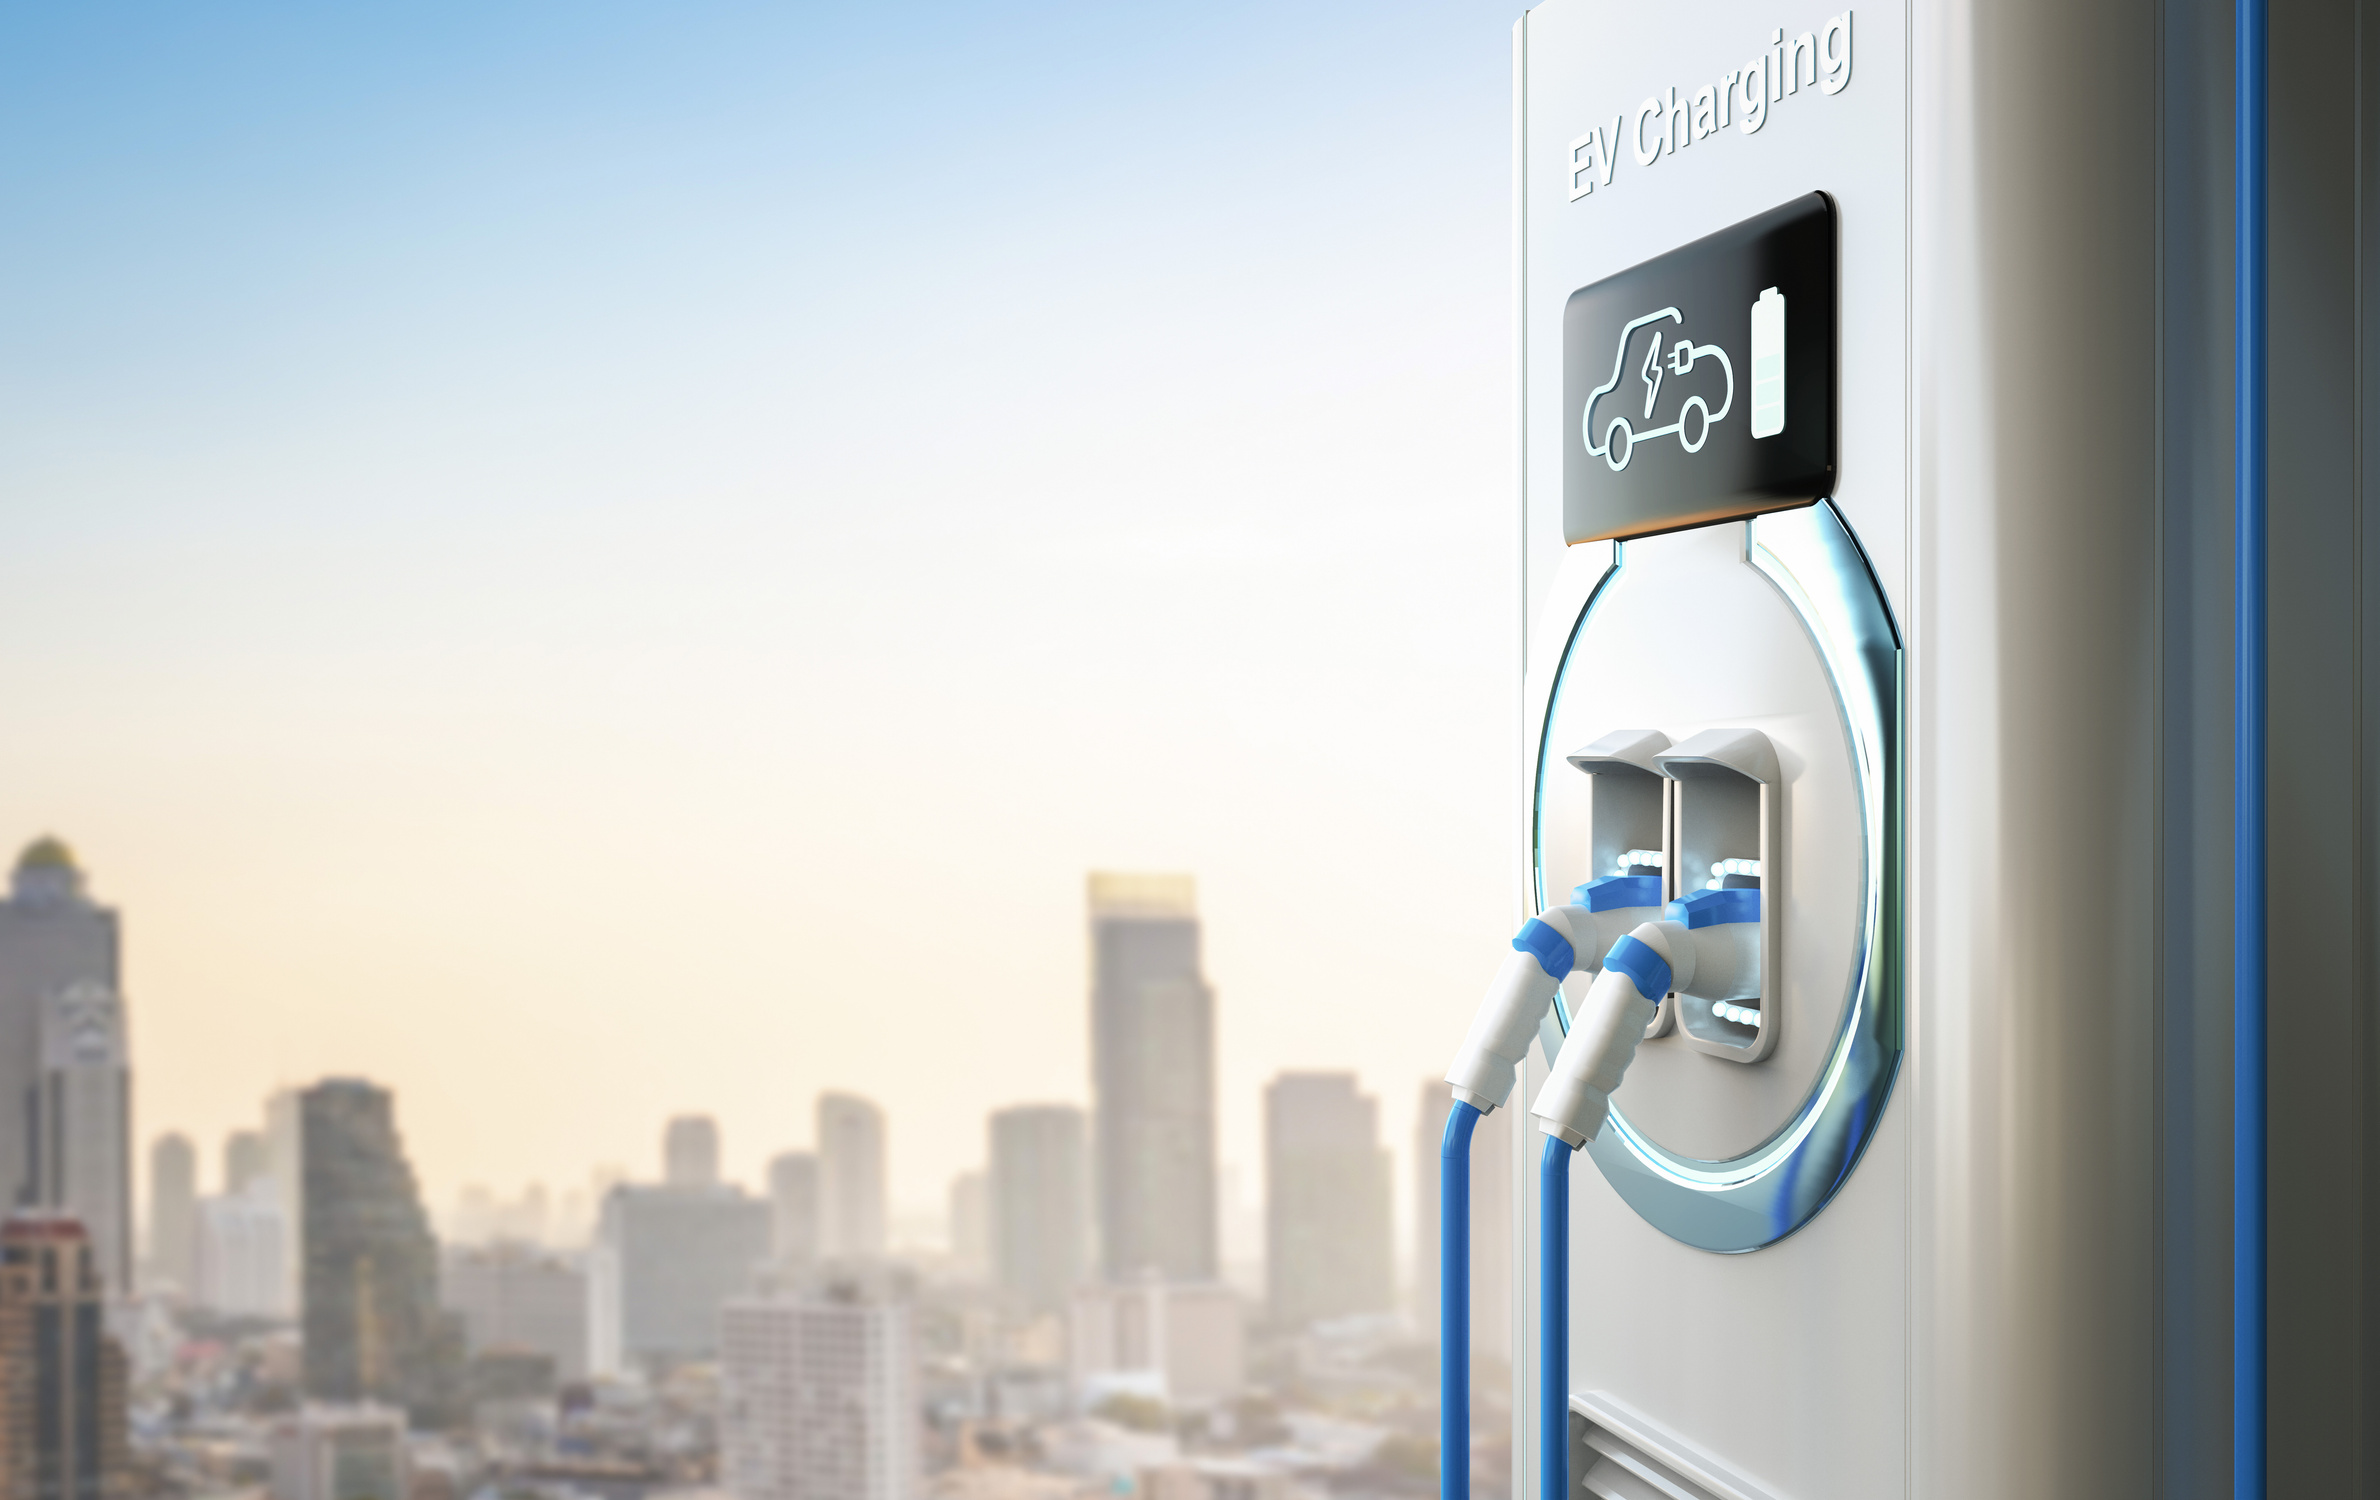 EV charging stations or electric vehicle recharging stations